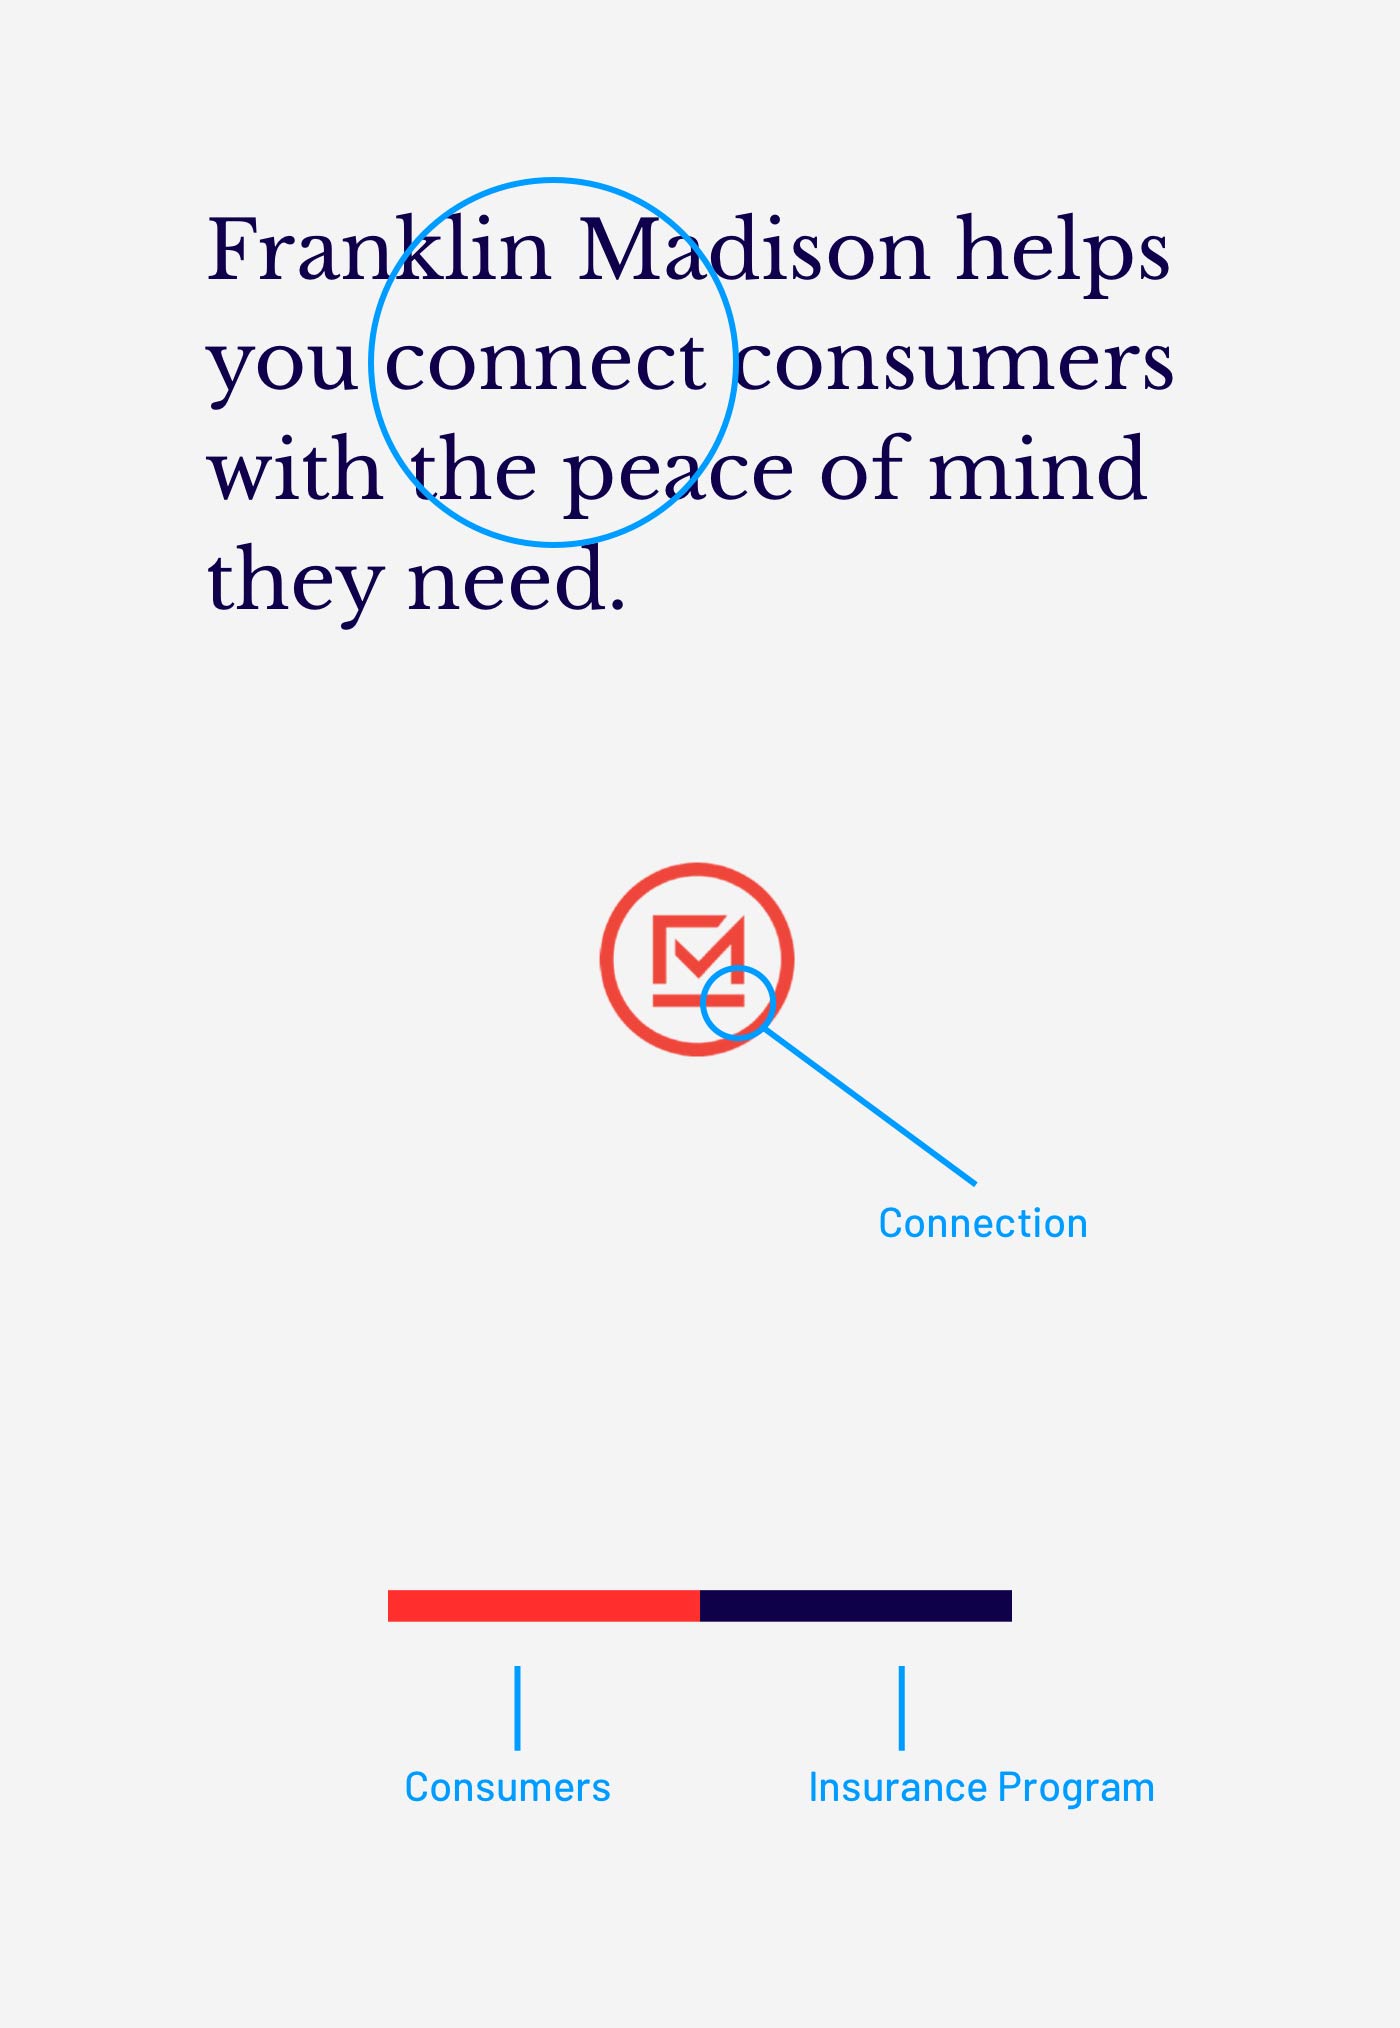 Graphic showing the Franklin Madison brand mark and how it represents the connection between its products and consumers' peace of mind